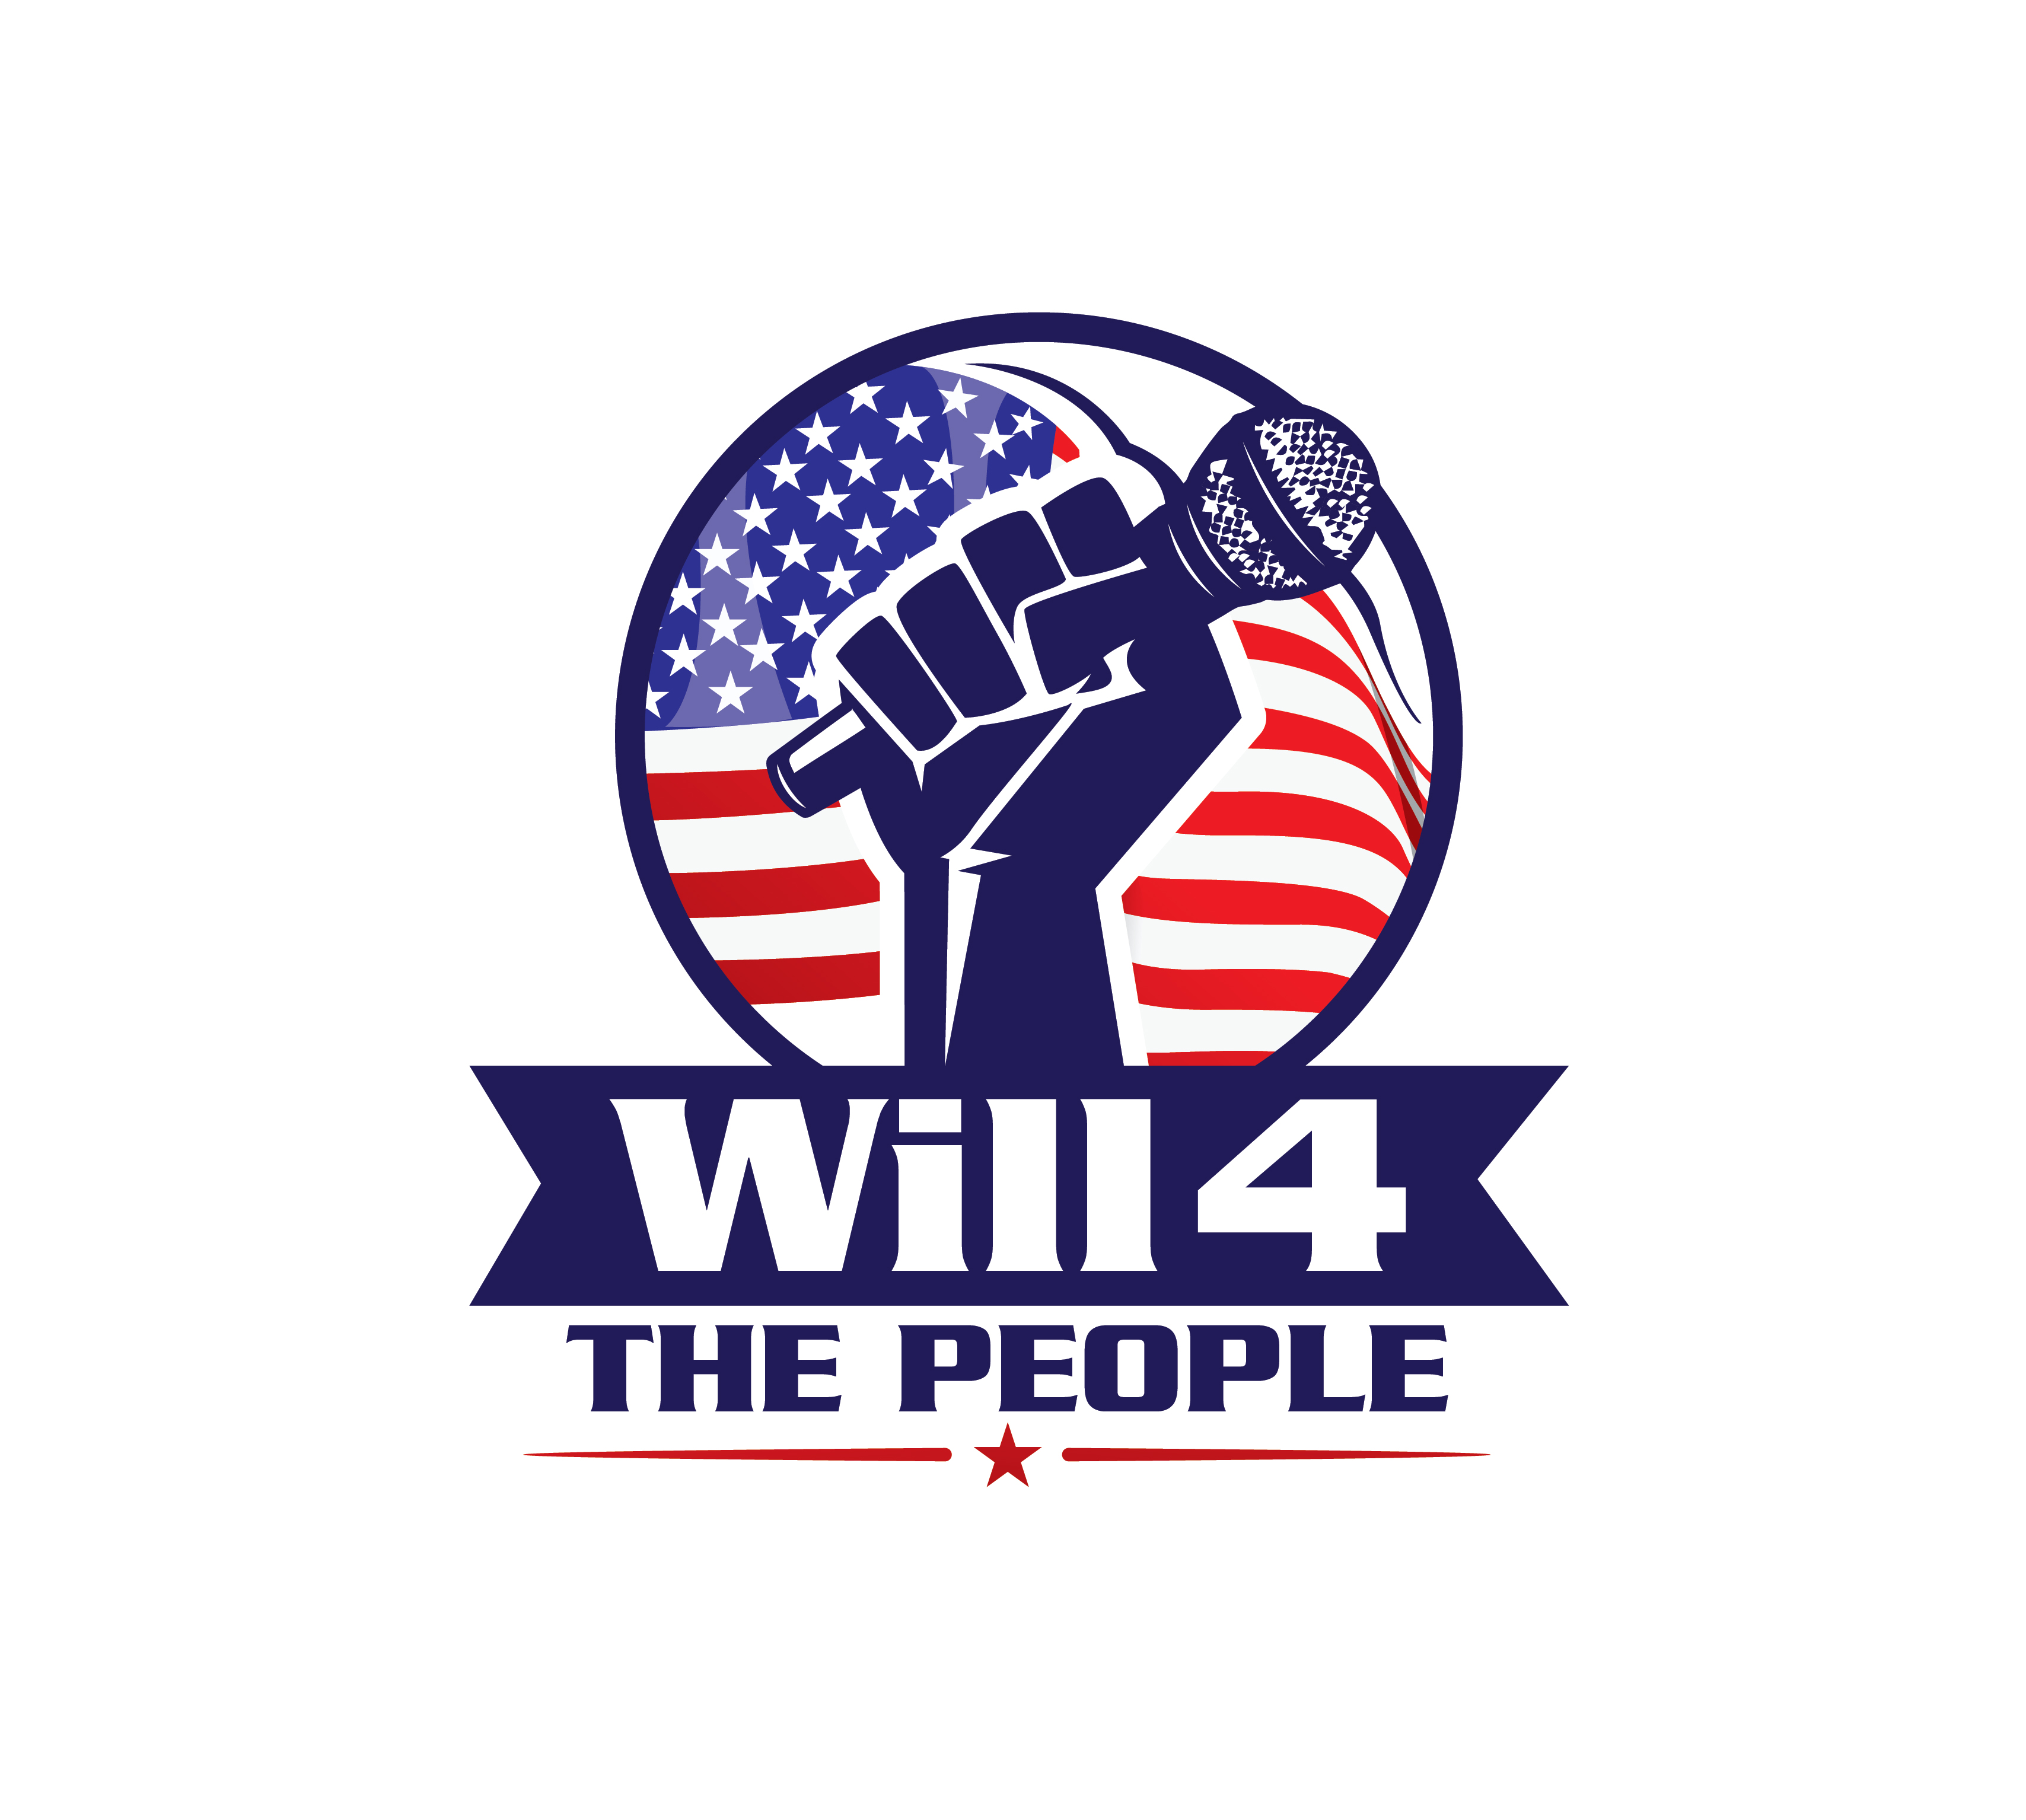 Will 4 the people for congress logo